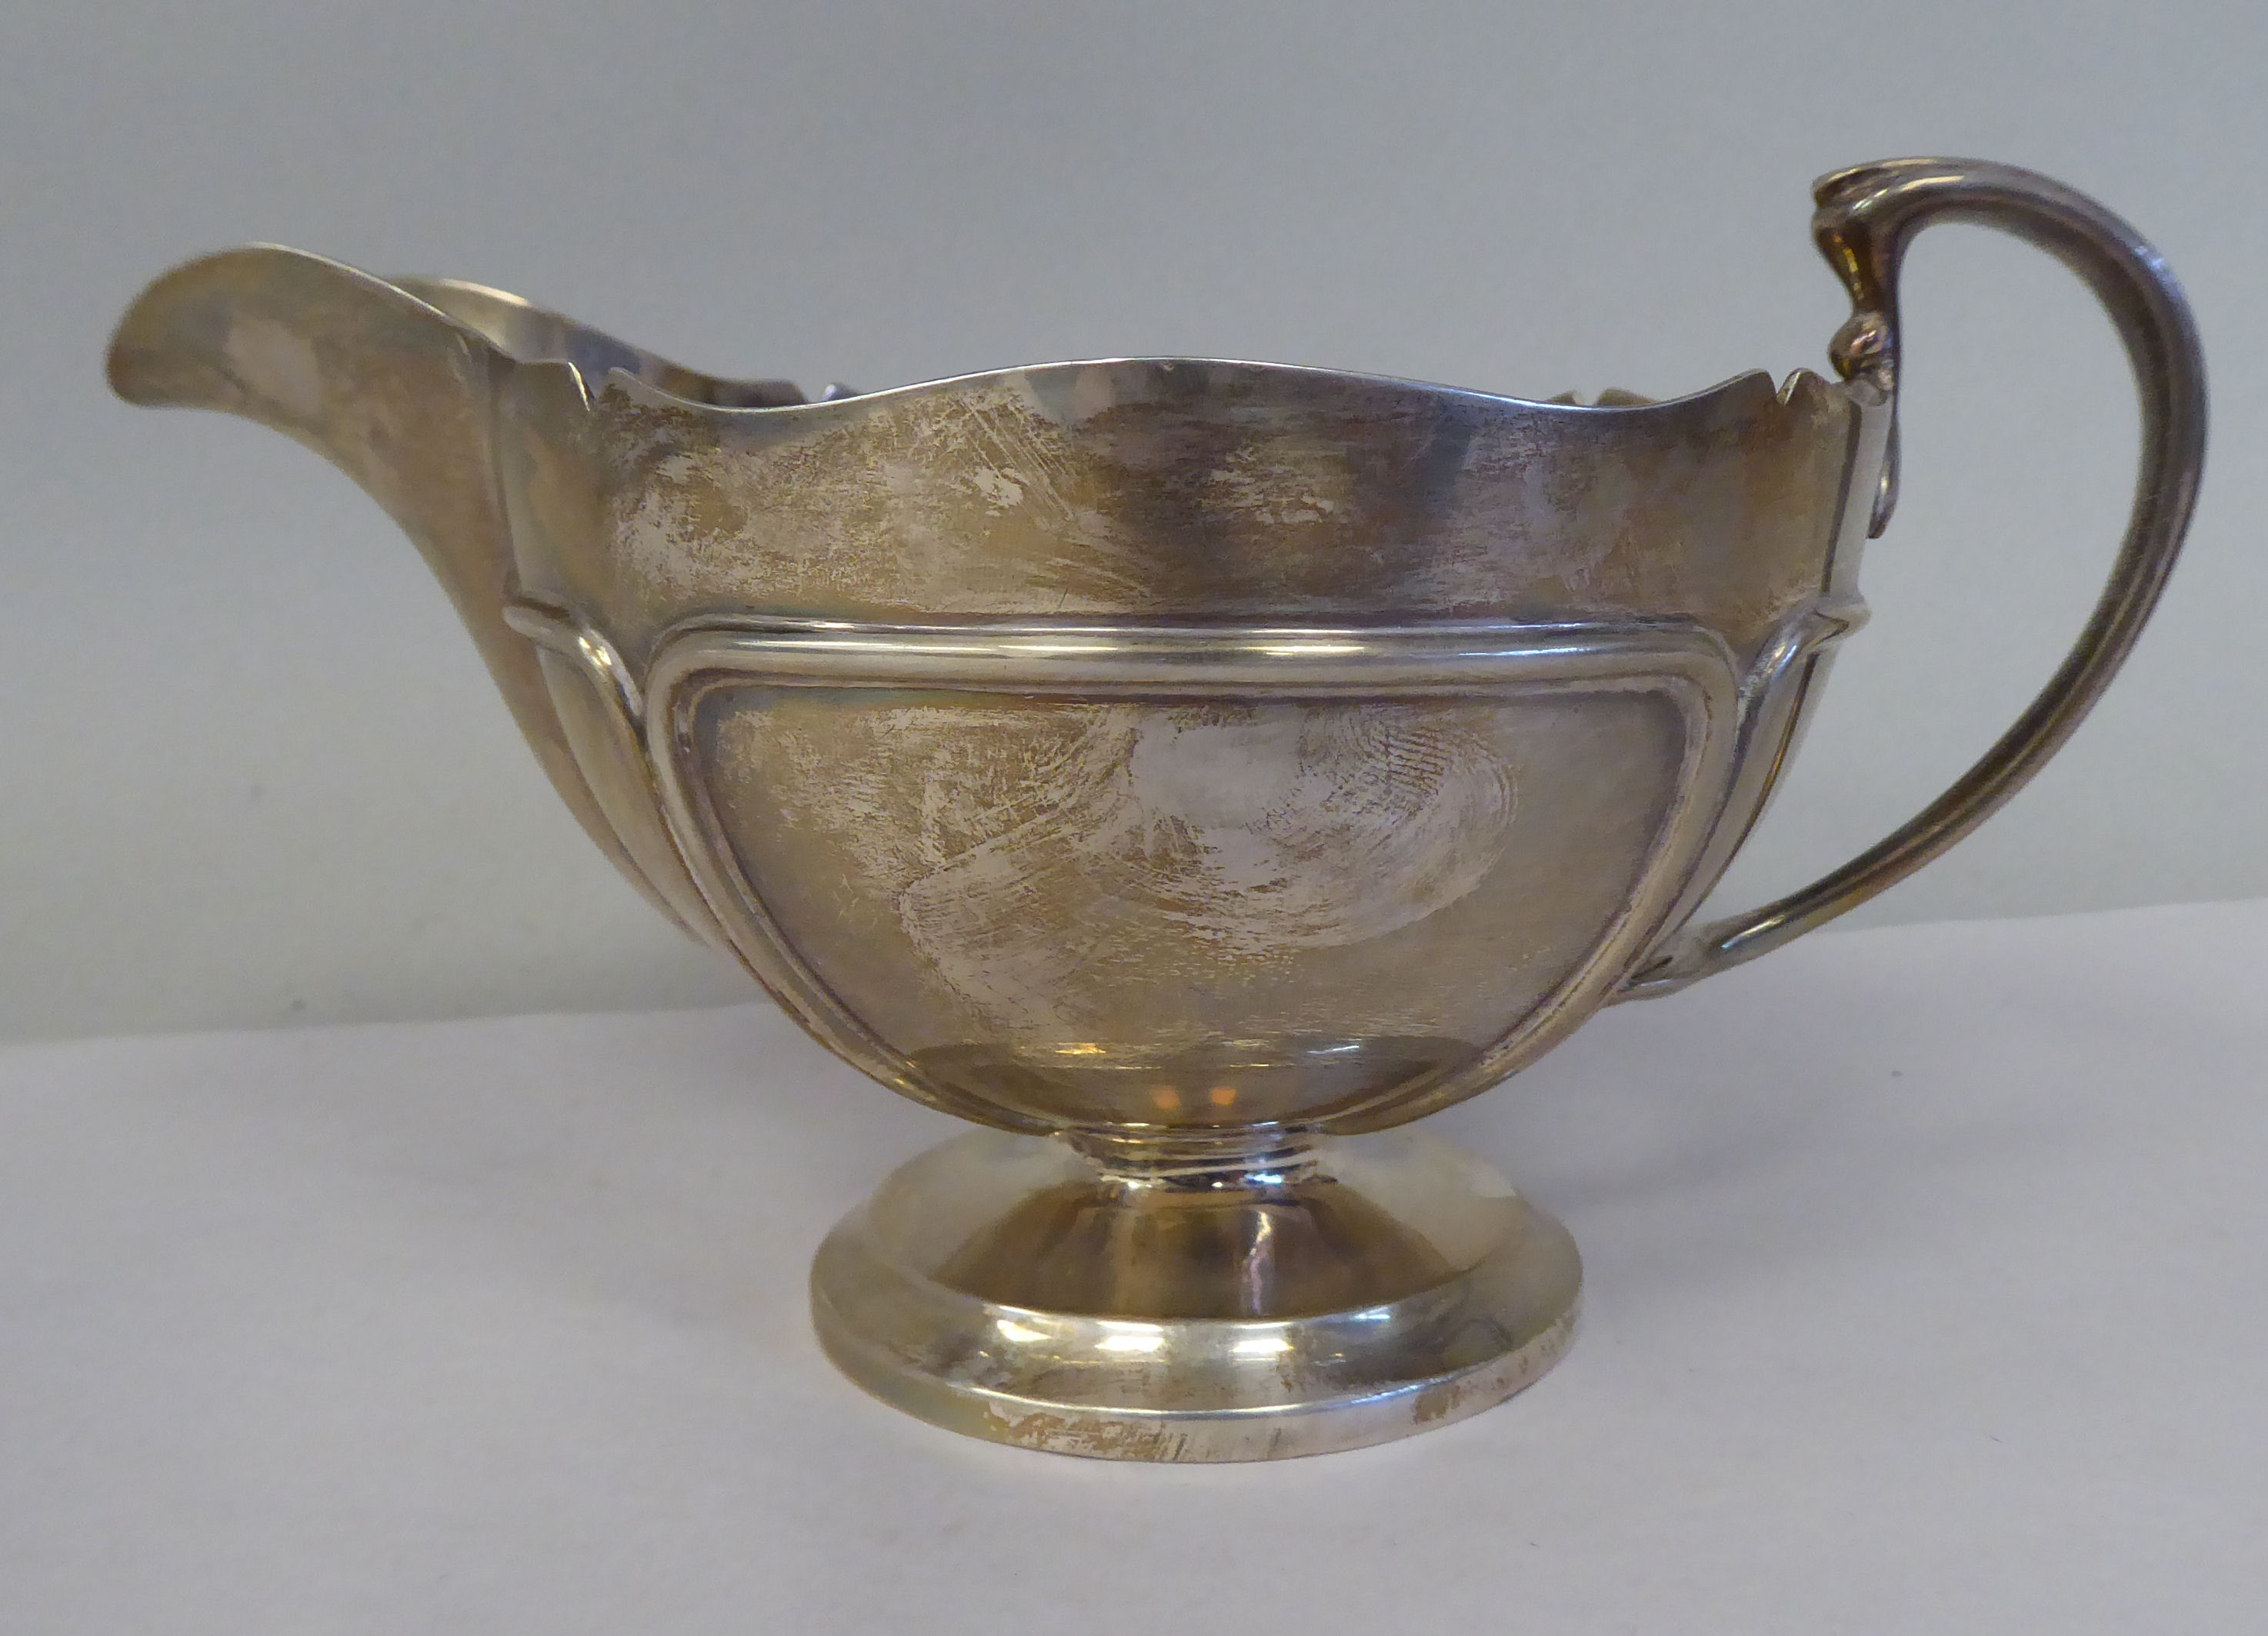 A four piece silver tea set, comprising a teapot of pedestal bowl display with an S-swept swept, - Image 11 of 12